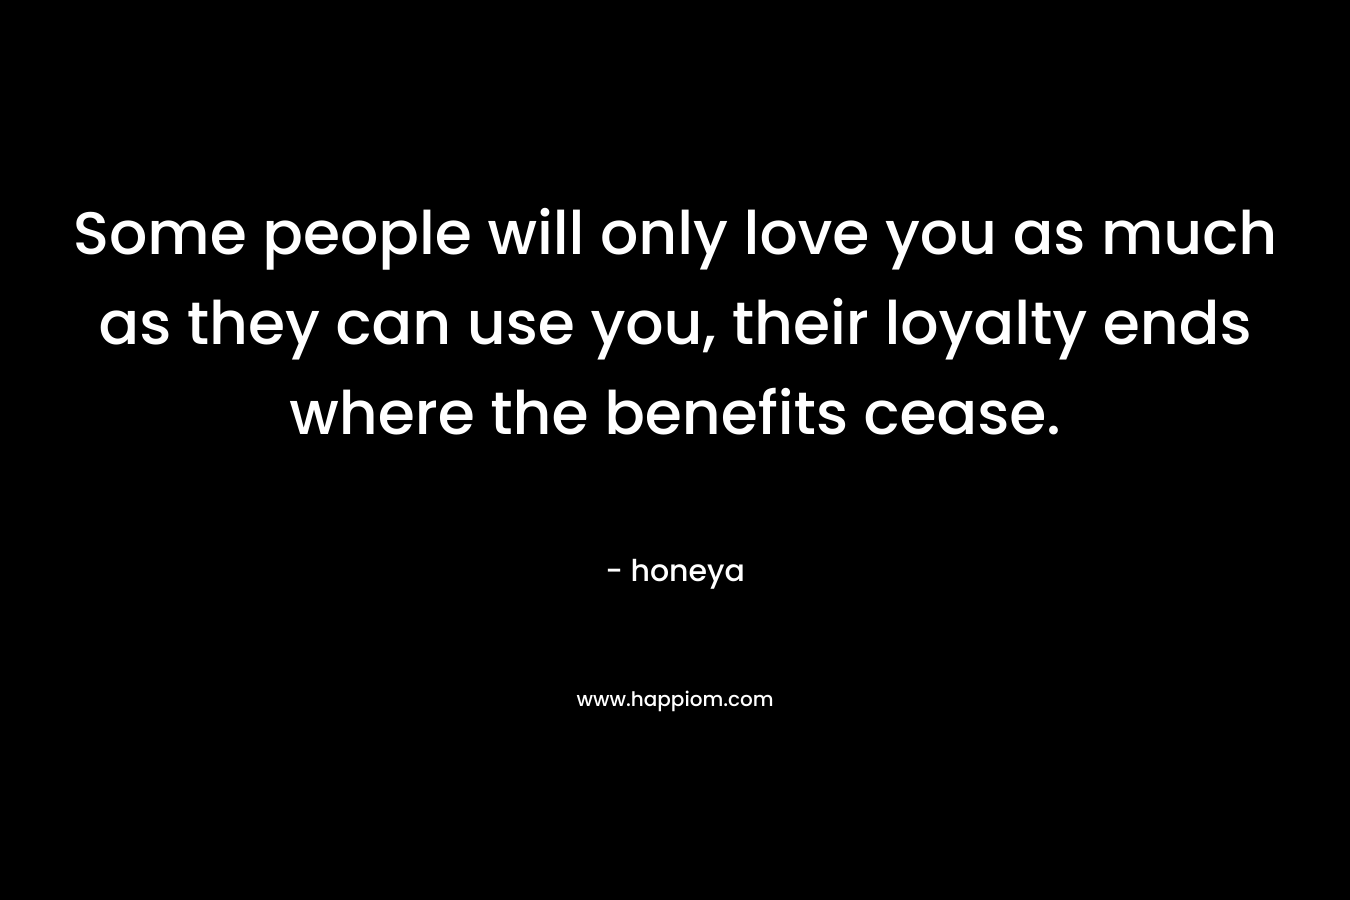 Some people will only love you as much as they can use you, their loyalty ends where the benefits cease.